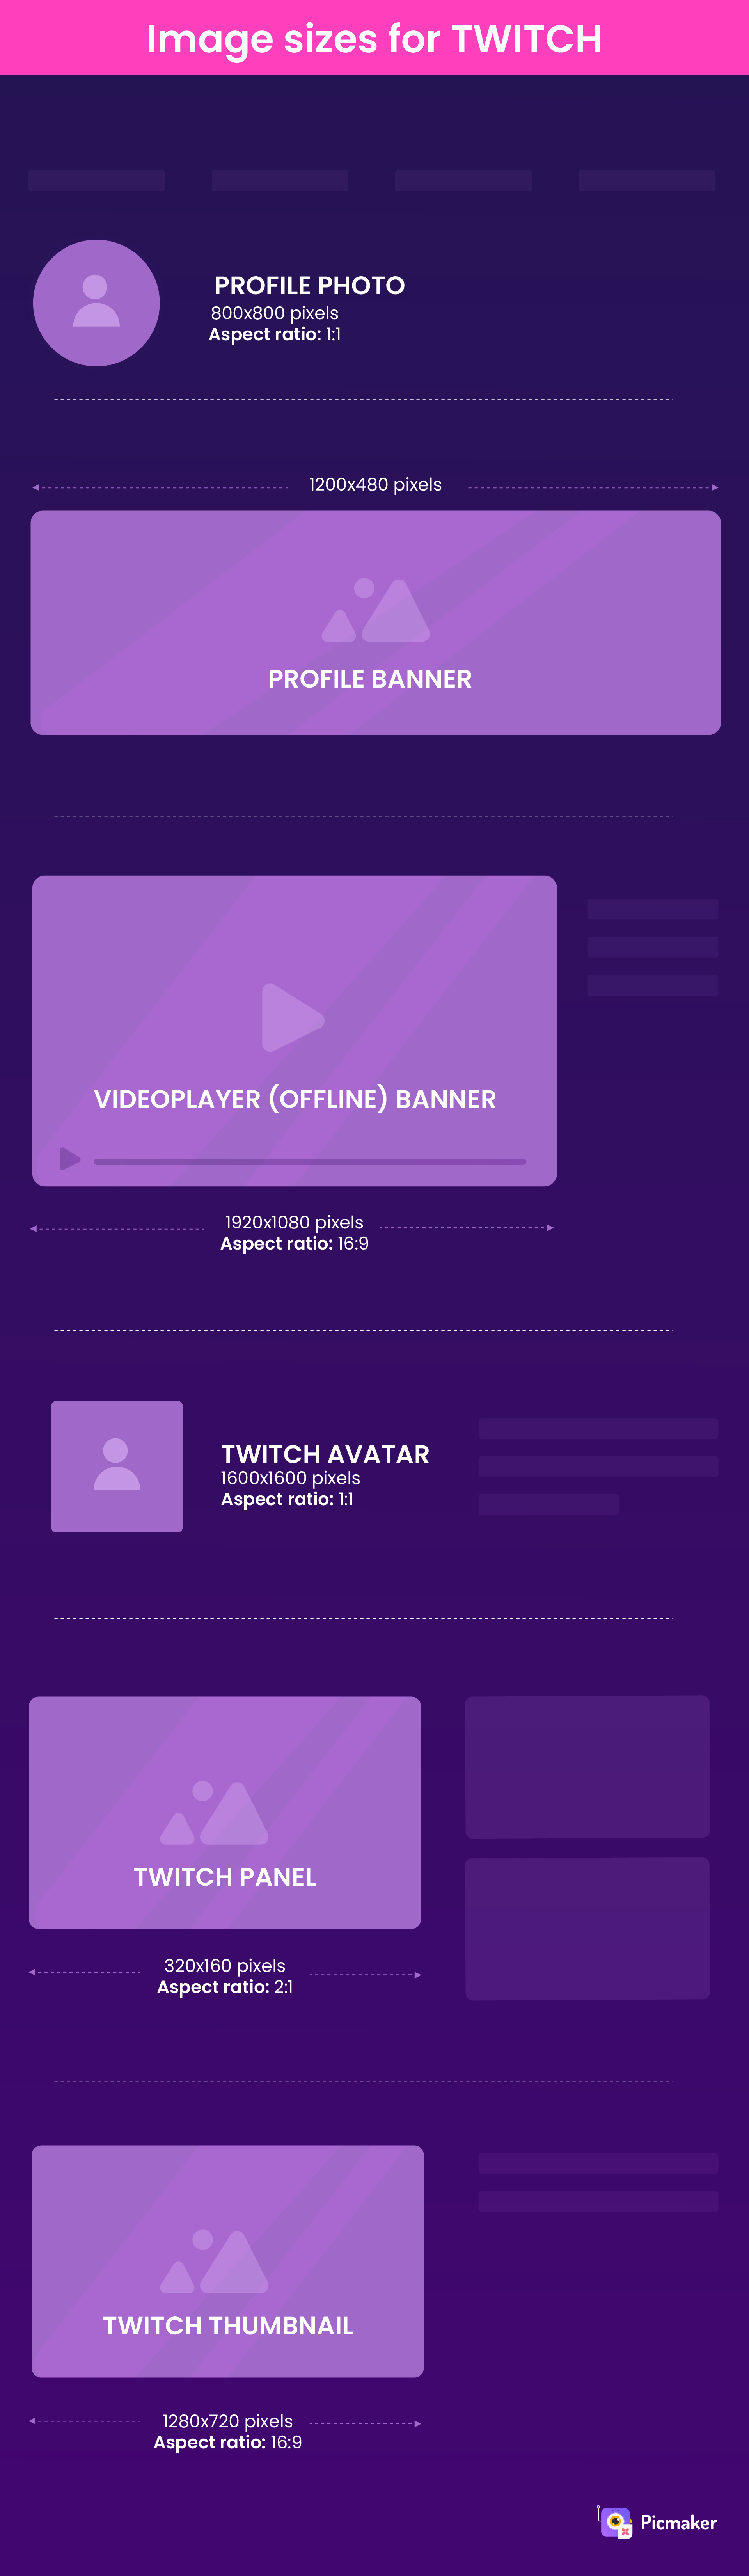 Twitch image sizes infographic